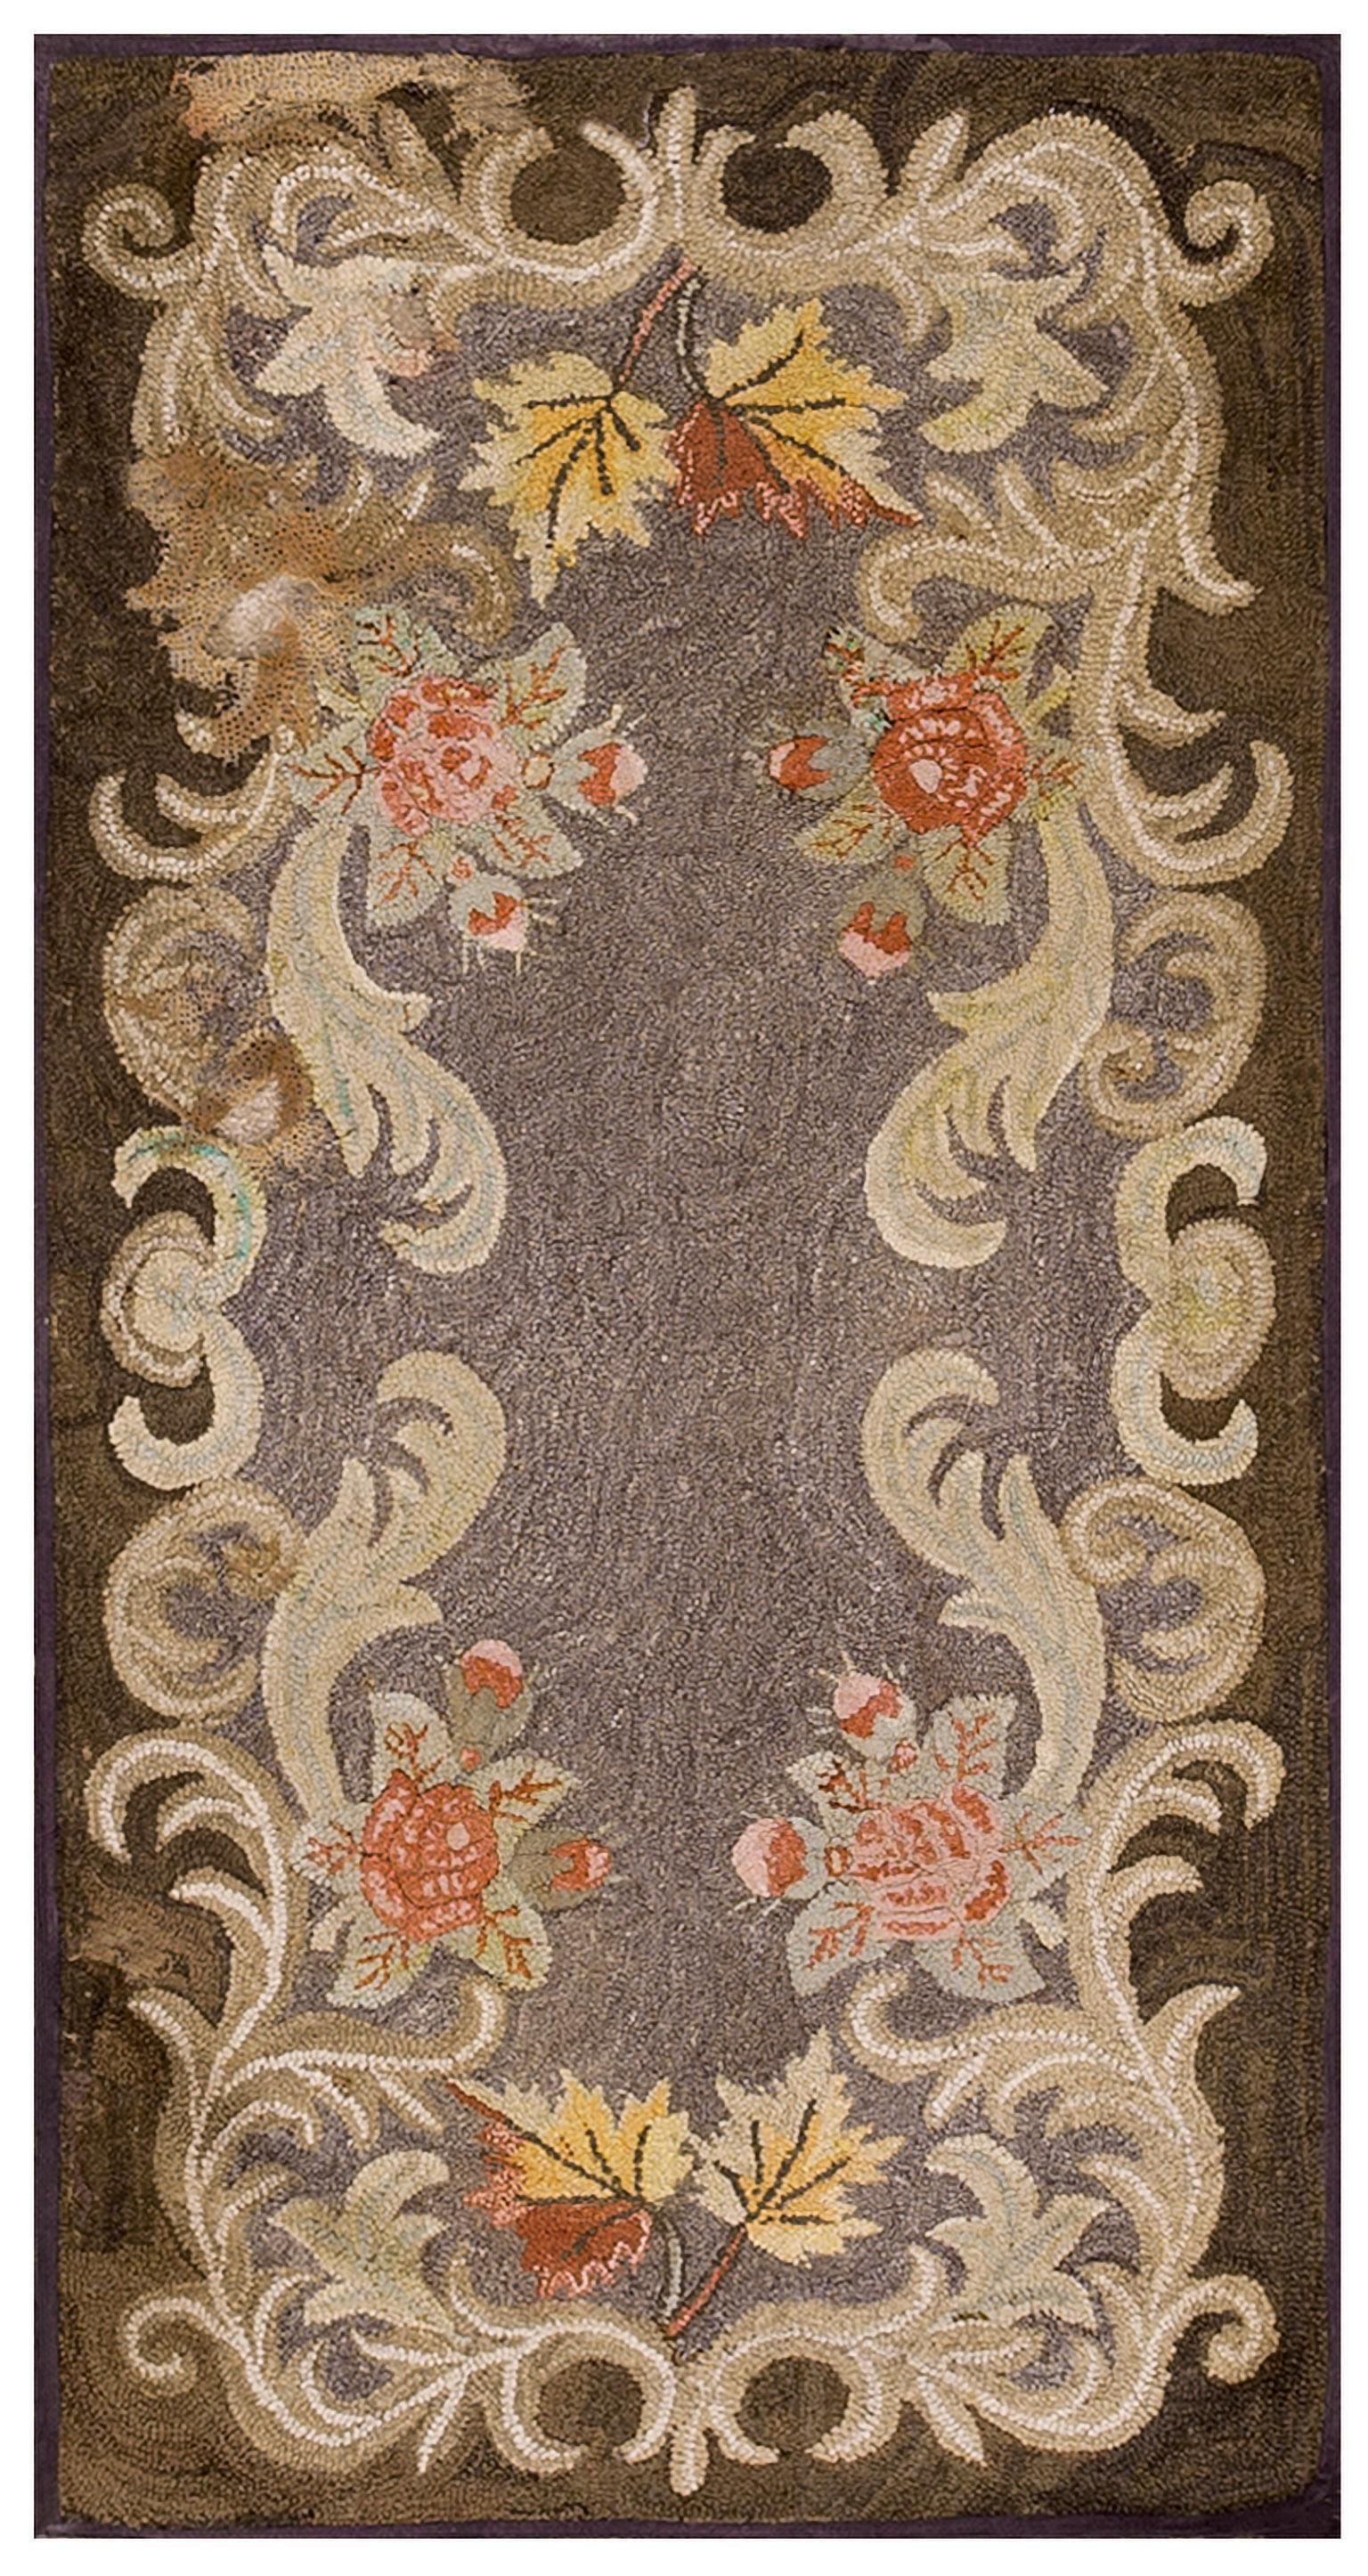 1920s American Hooked Rug ( 2' 8' 'x 5' 2'' - 82 x 158 cm ) For Sale